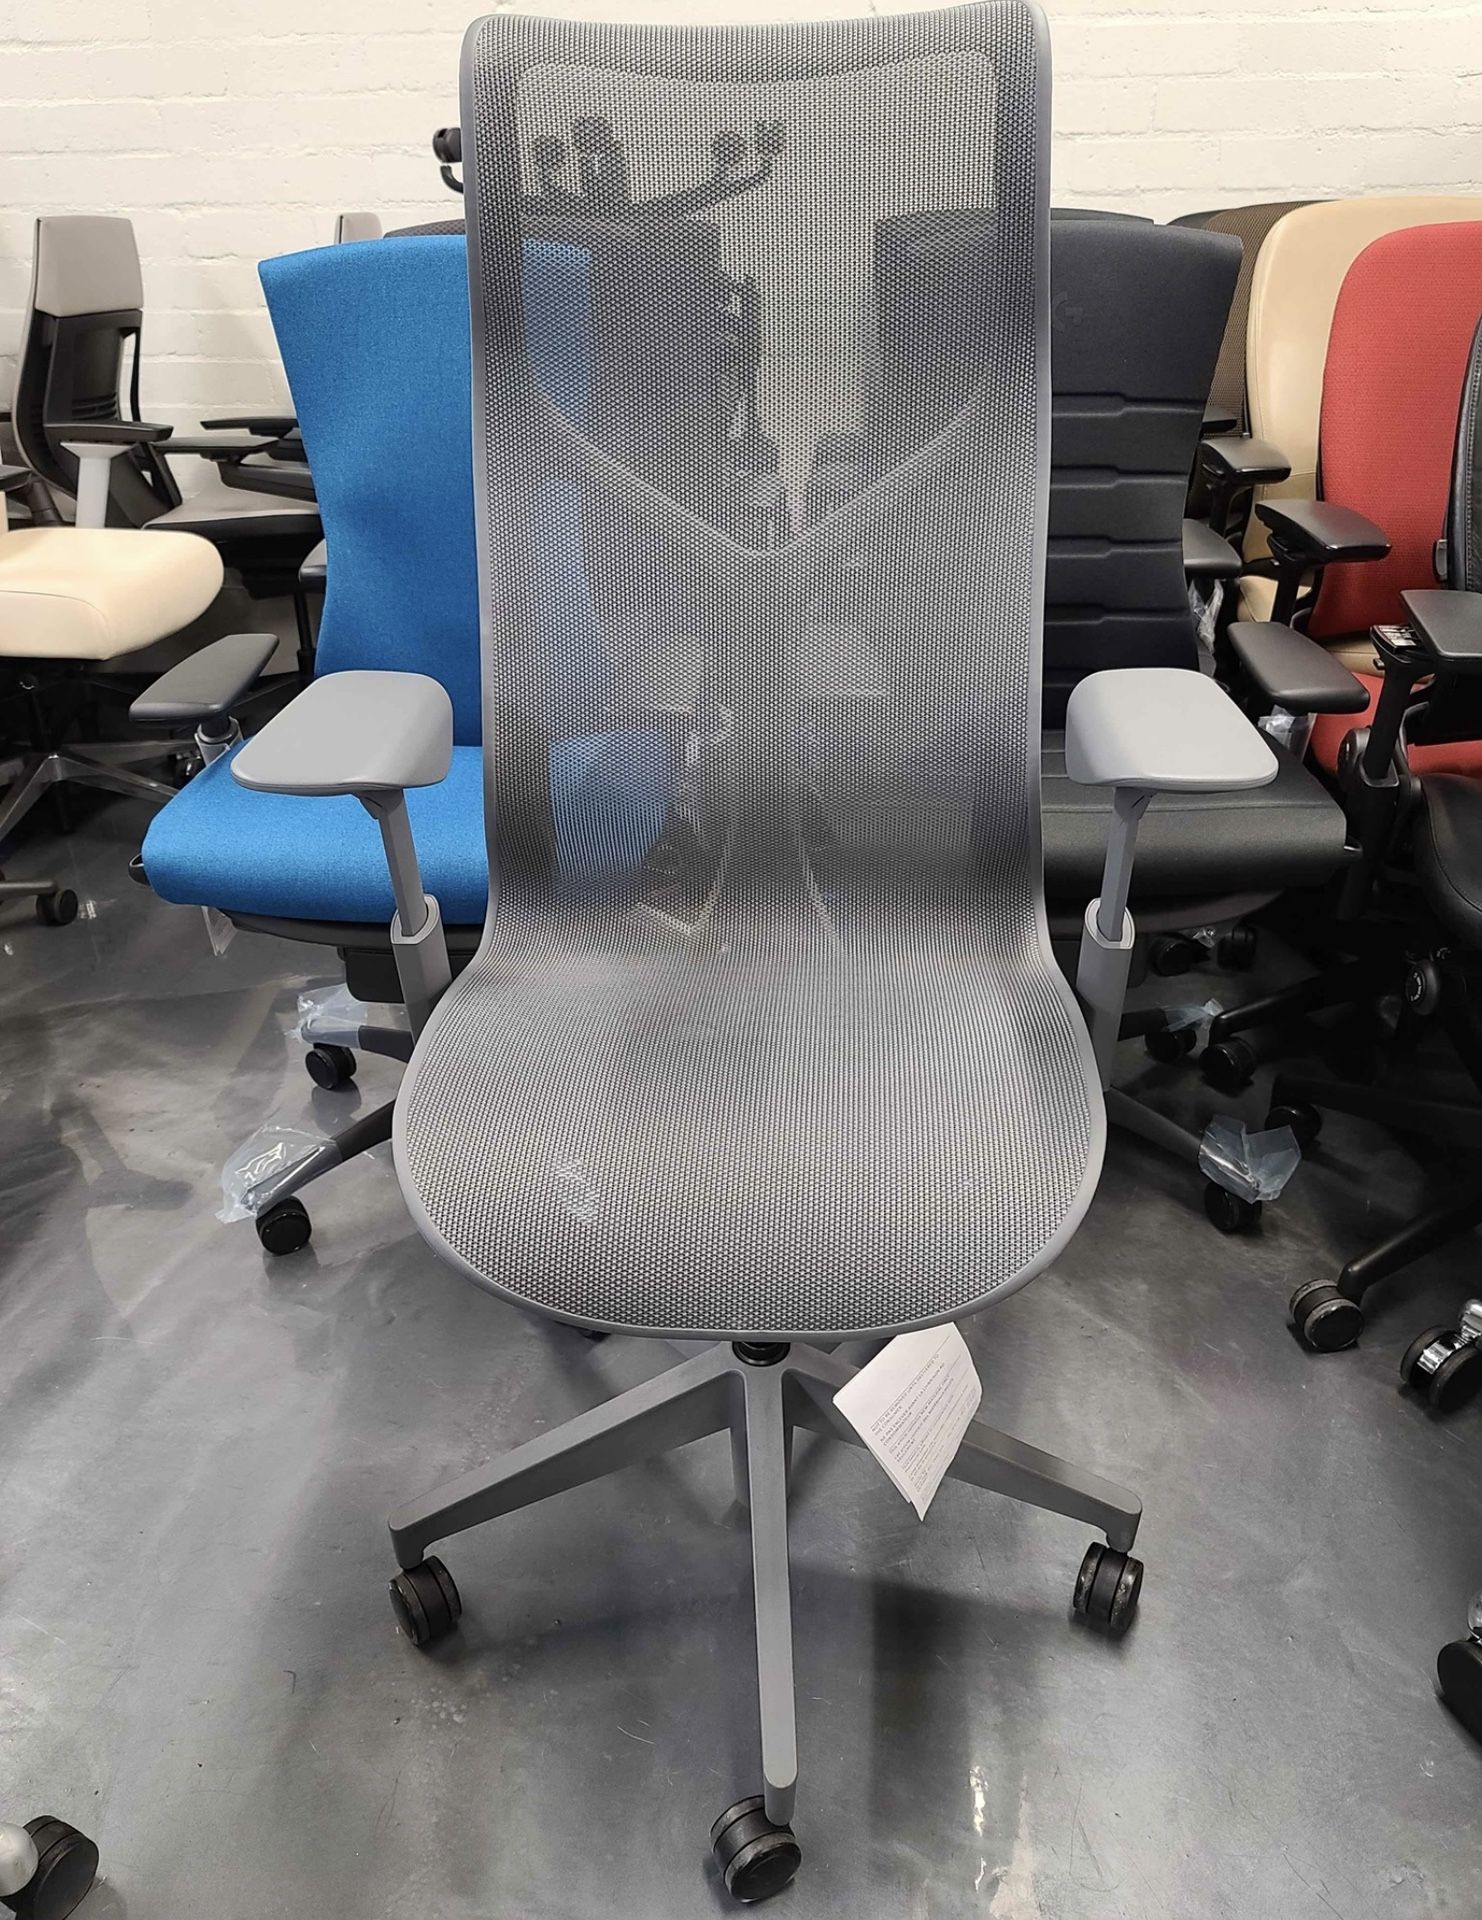 🔥BRAND NEW🔥HERMAN MILLER COSM HIGH BACK CHAIR DESIGNED BY STUDIO 7.5 BEAUTIFUL CARBON FRAME & MESH